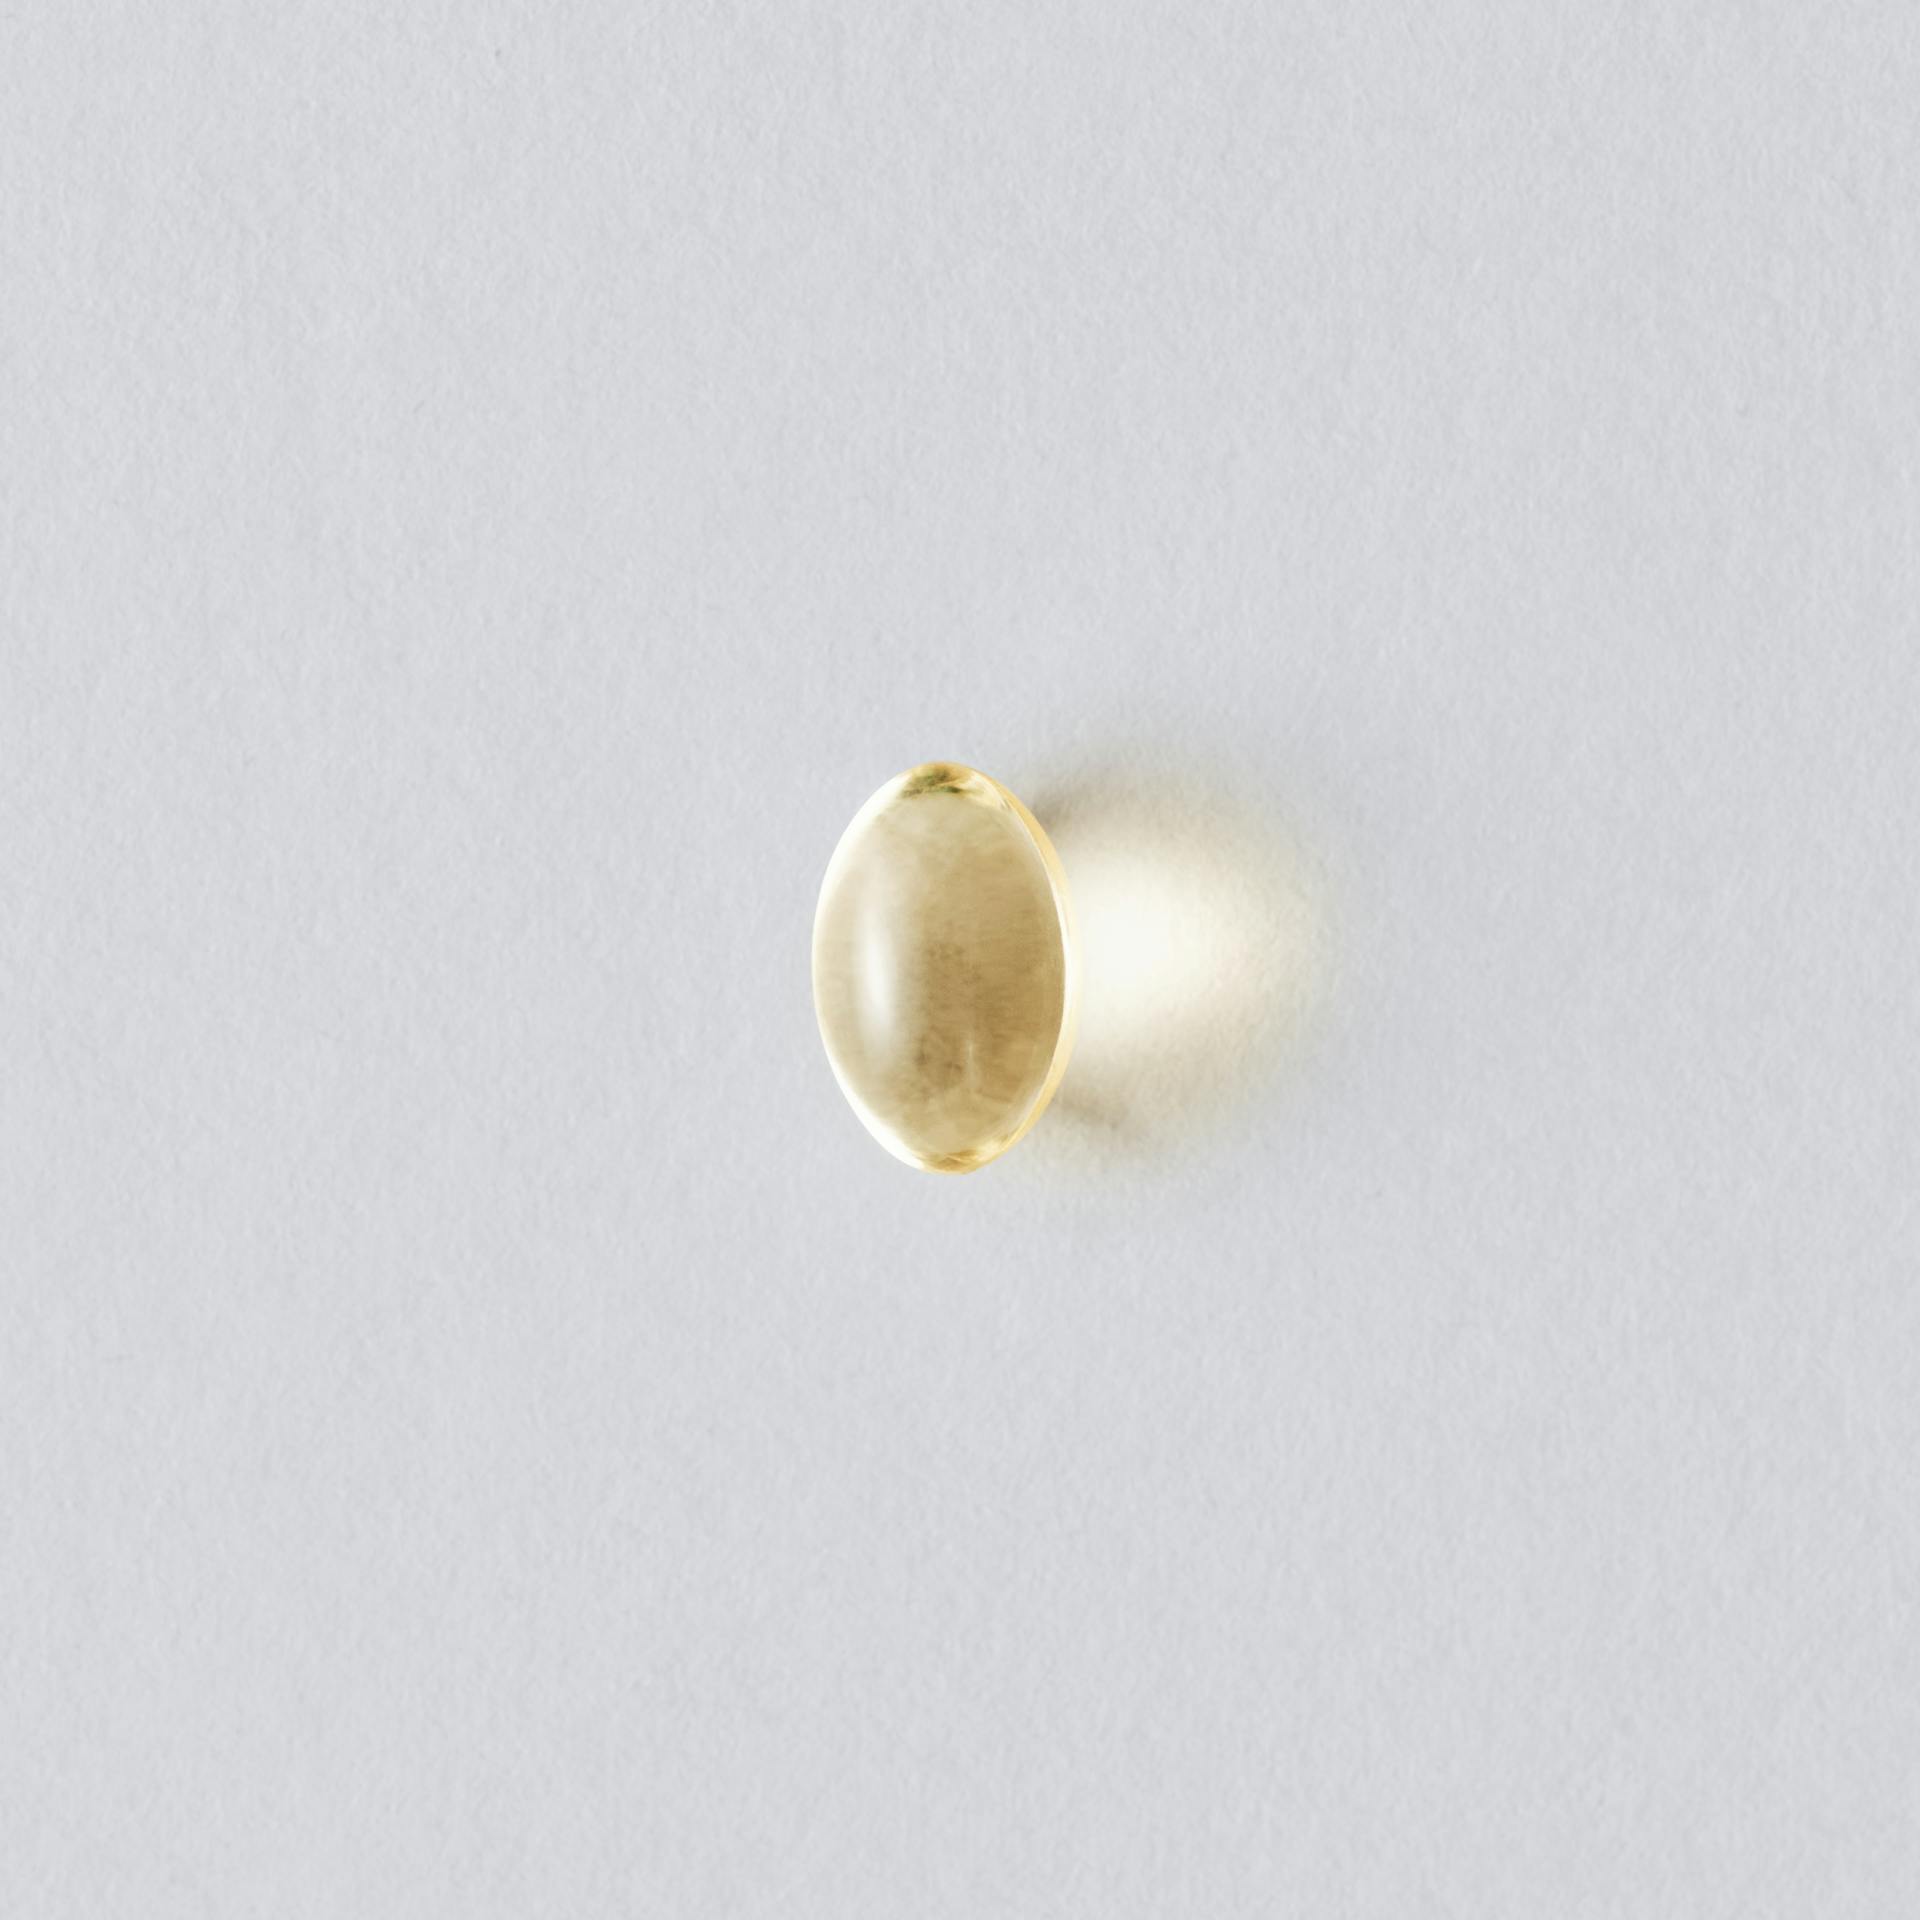 Vitamin D3 product image.